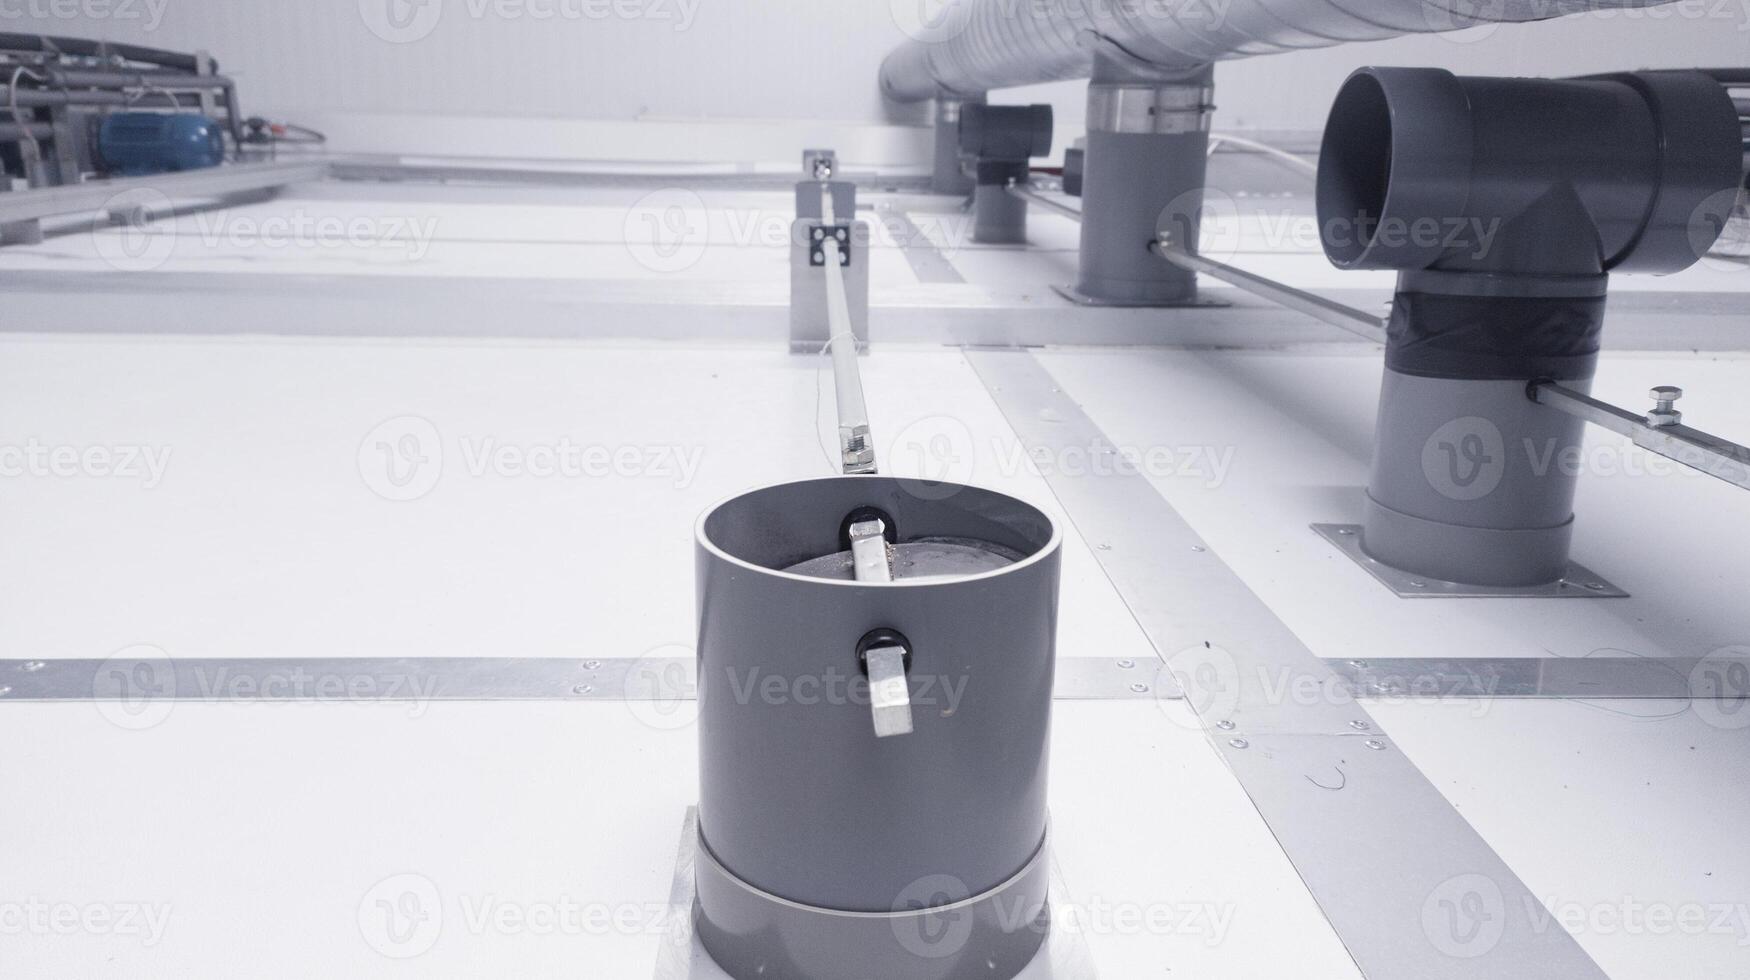 Automatic damper valve controlled by the machine. photo